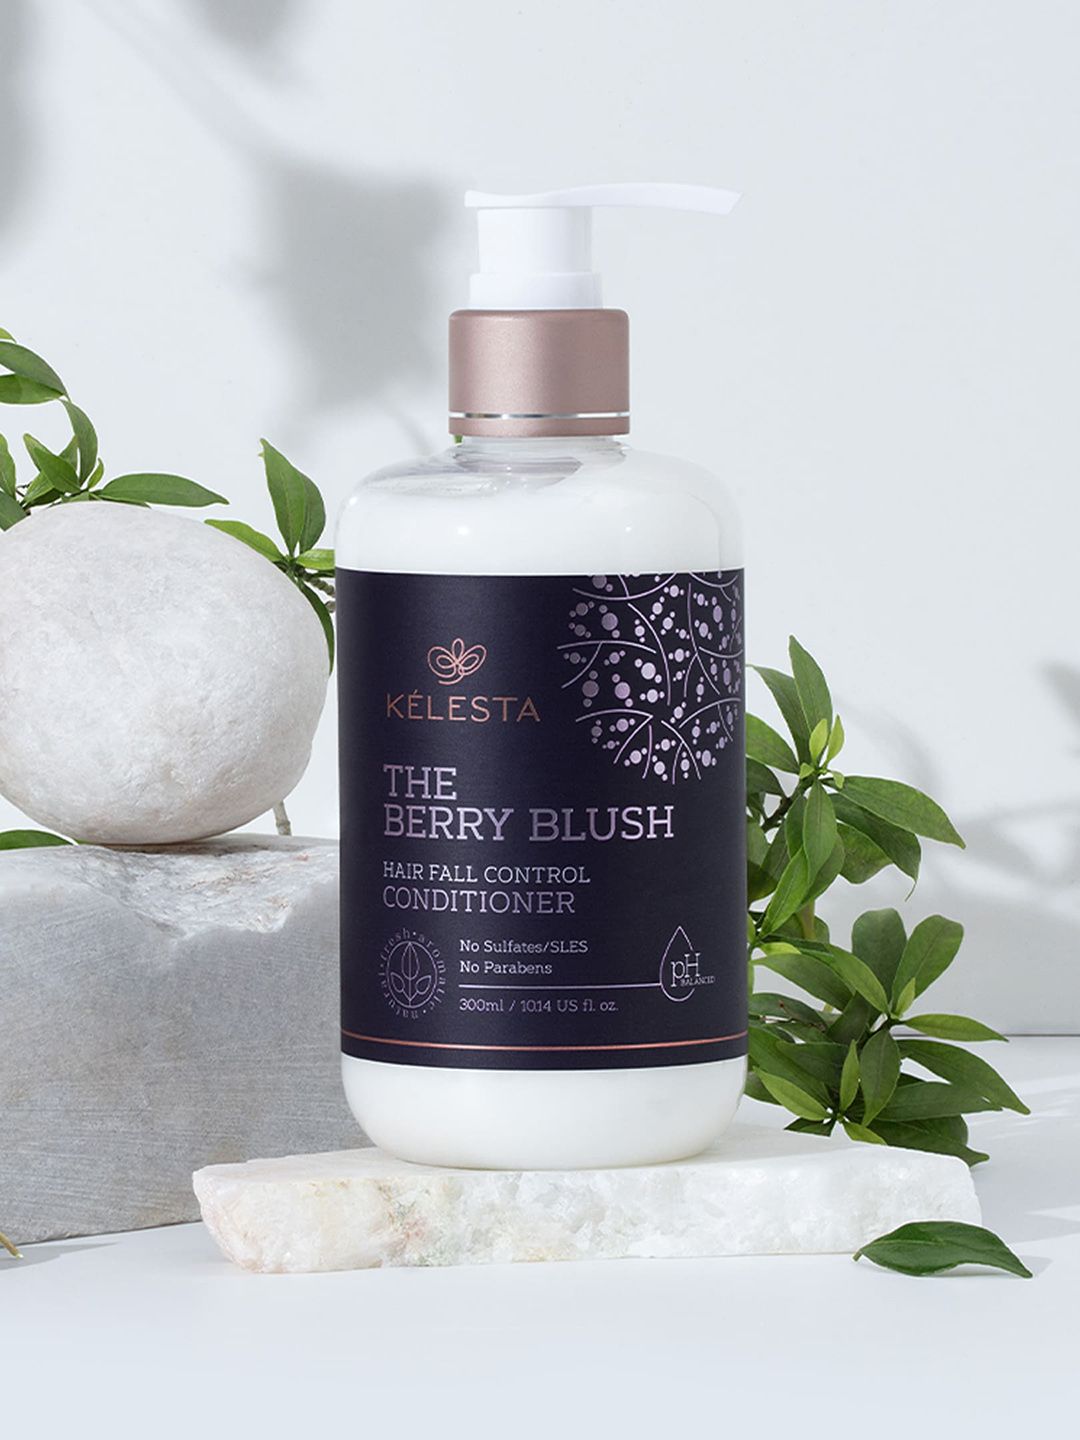 KELESTA The Berry Blush Hair Fall Control Conditioner - 300ml Price in India